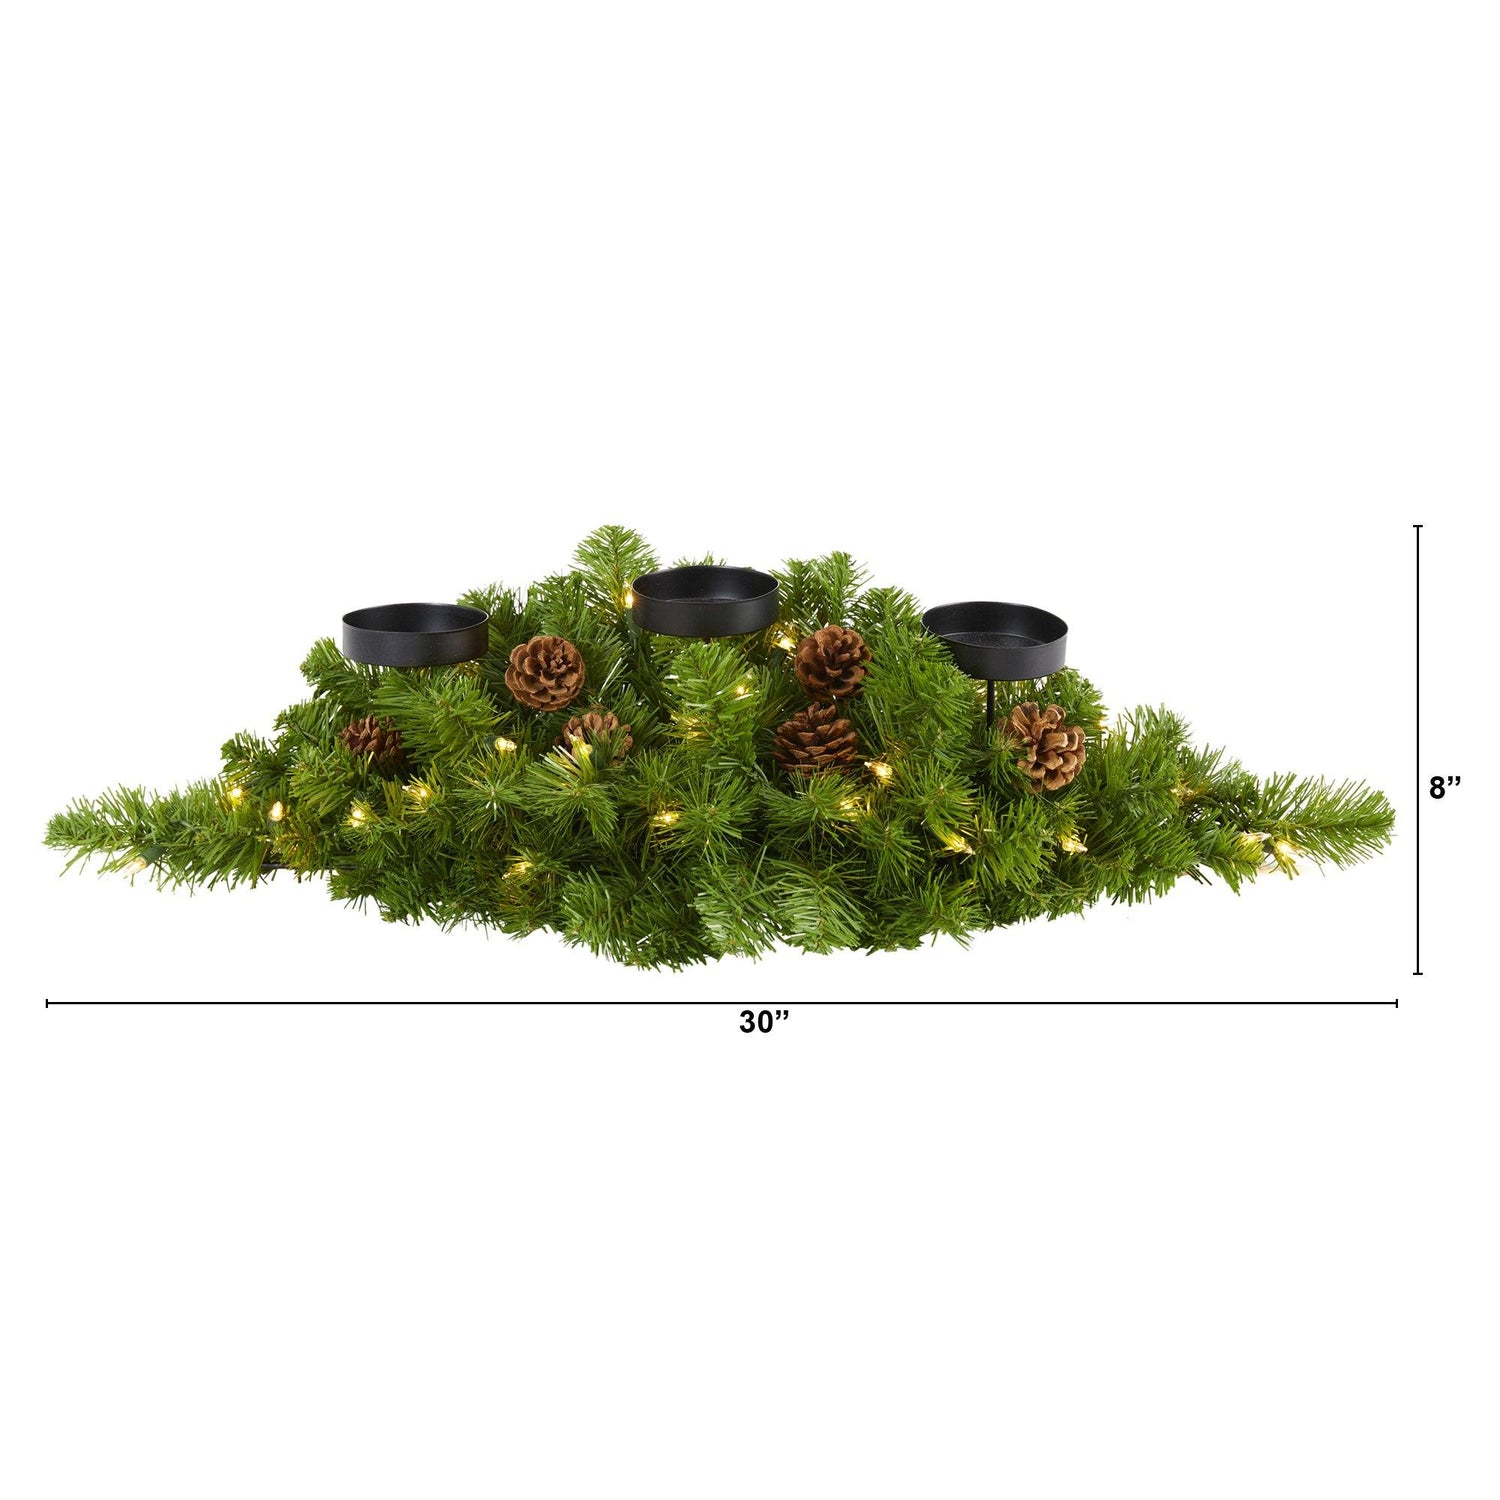 30” Christmas Artificial Pine Triple Candelabrum with 35 Clear Lights and Pine Cones